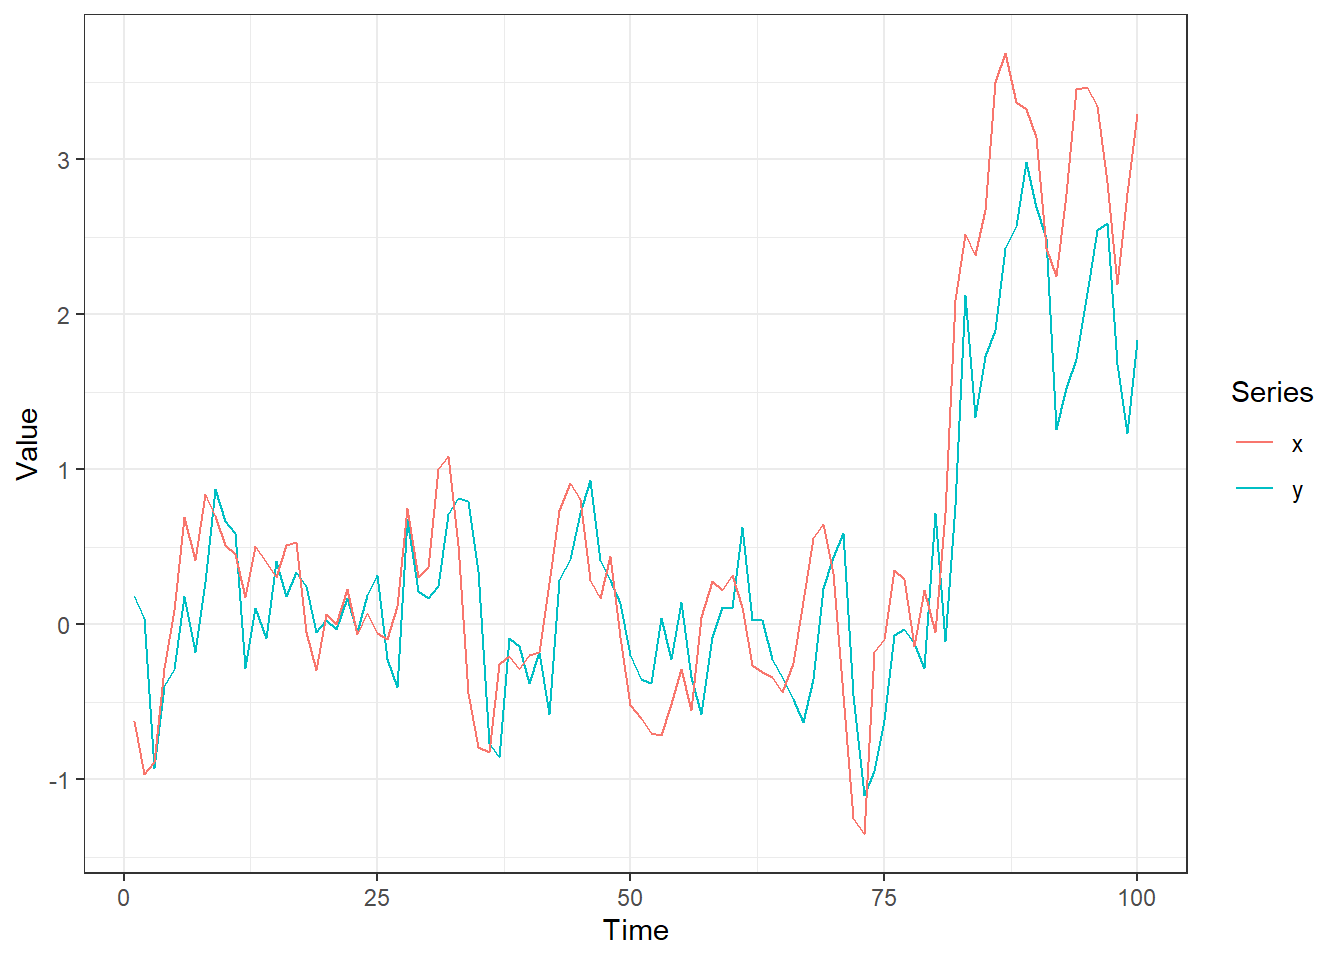 Line plot with a pink line labelled x and a blue line labelled y. The axes are Value on the Y and Time on the X. The two lines follow each other fluctuating around zero, and both jump to fluctuating around 2.5 after time 80.